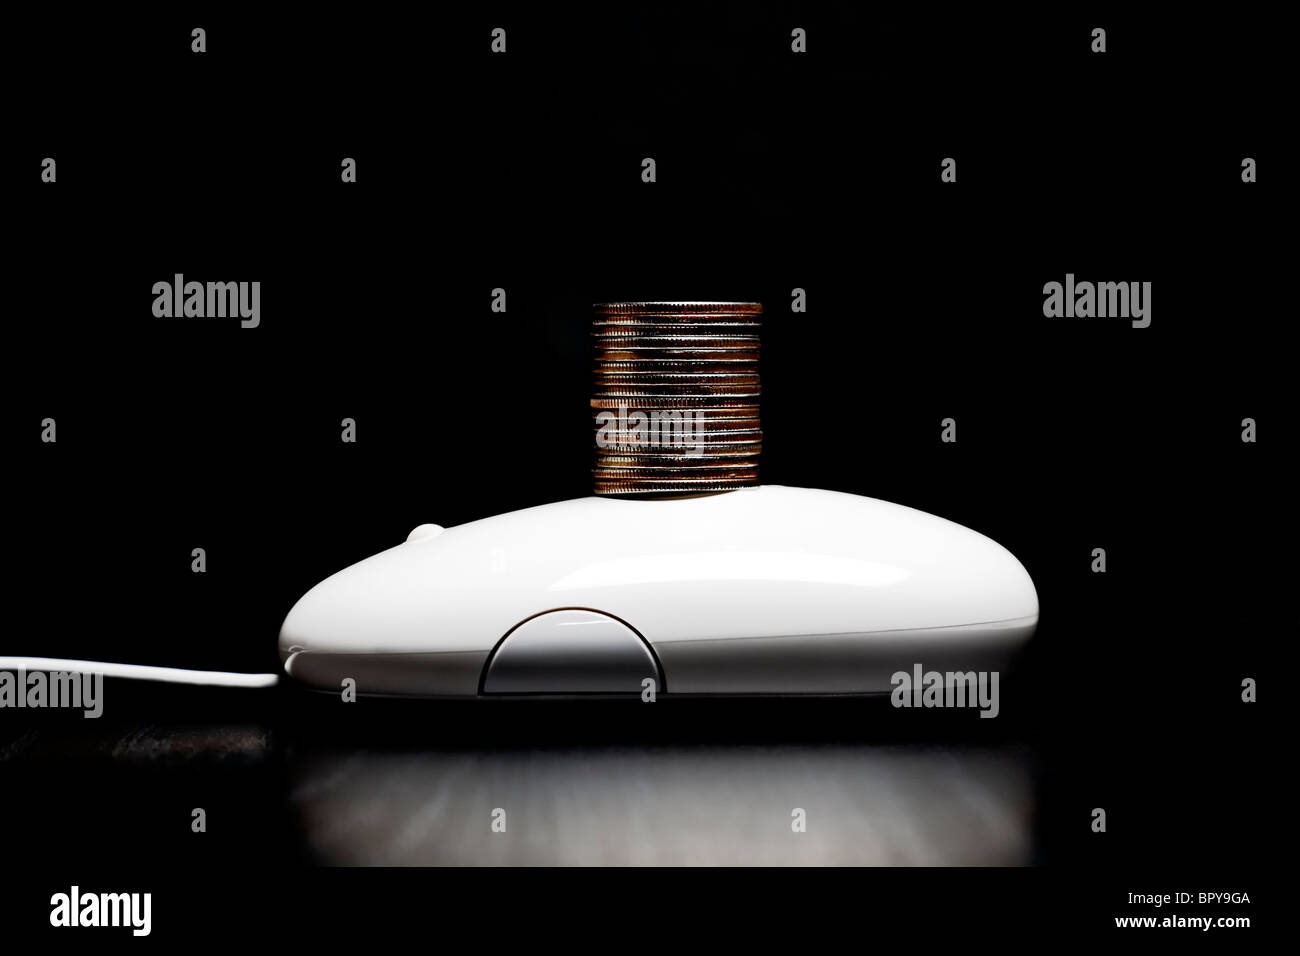 Computer mouse with a stack of coins Stock Photo